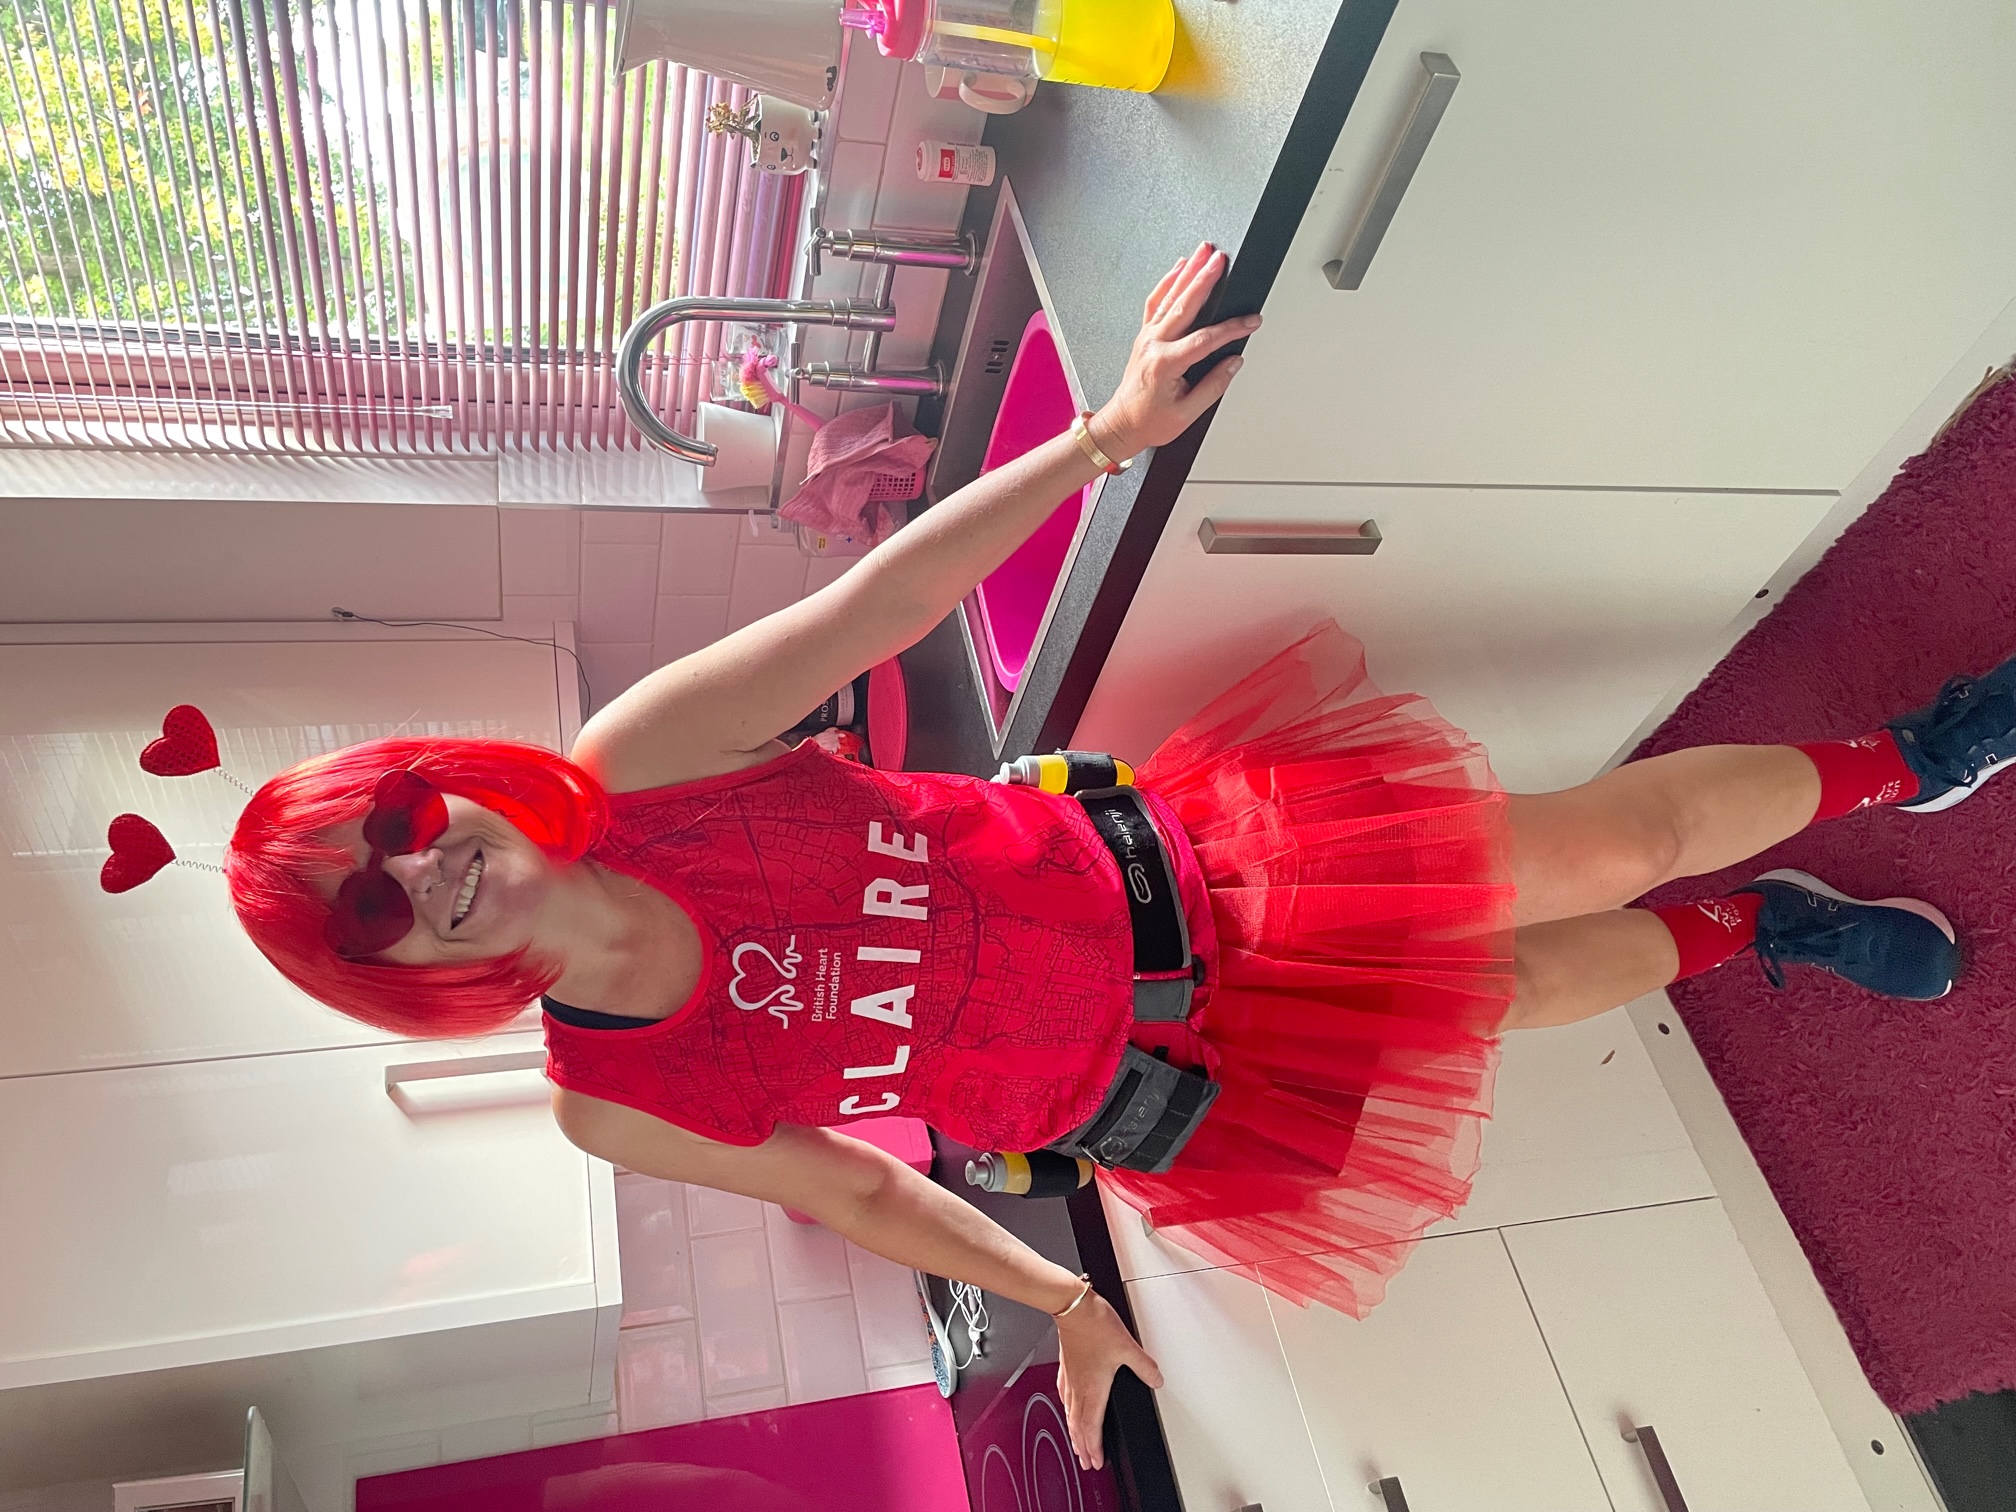 Claire will run the TCS London Marathon in a themed outfit to raise money for the British Heart Foundation